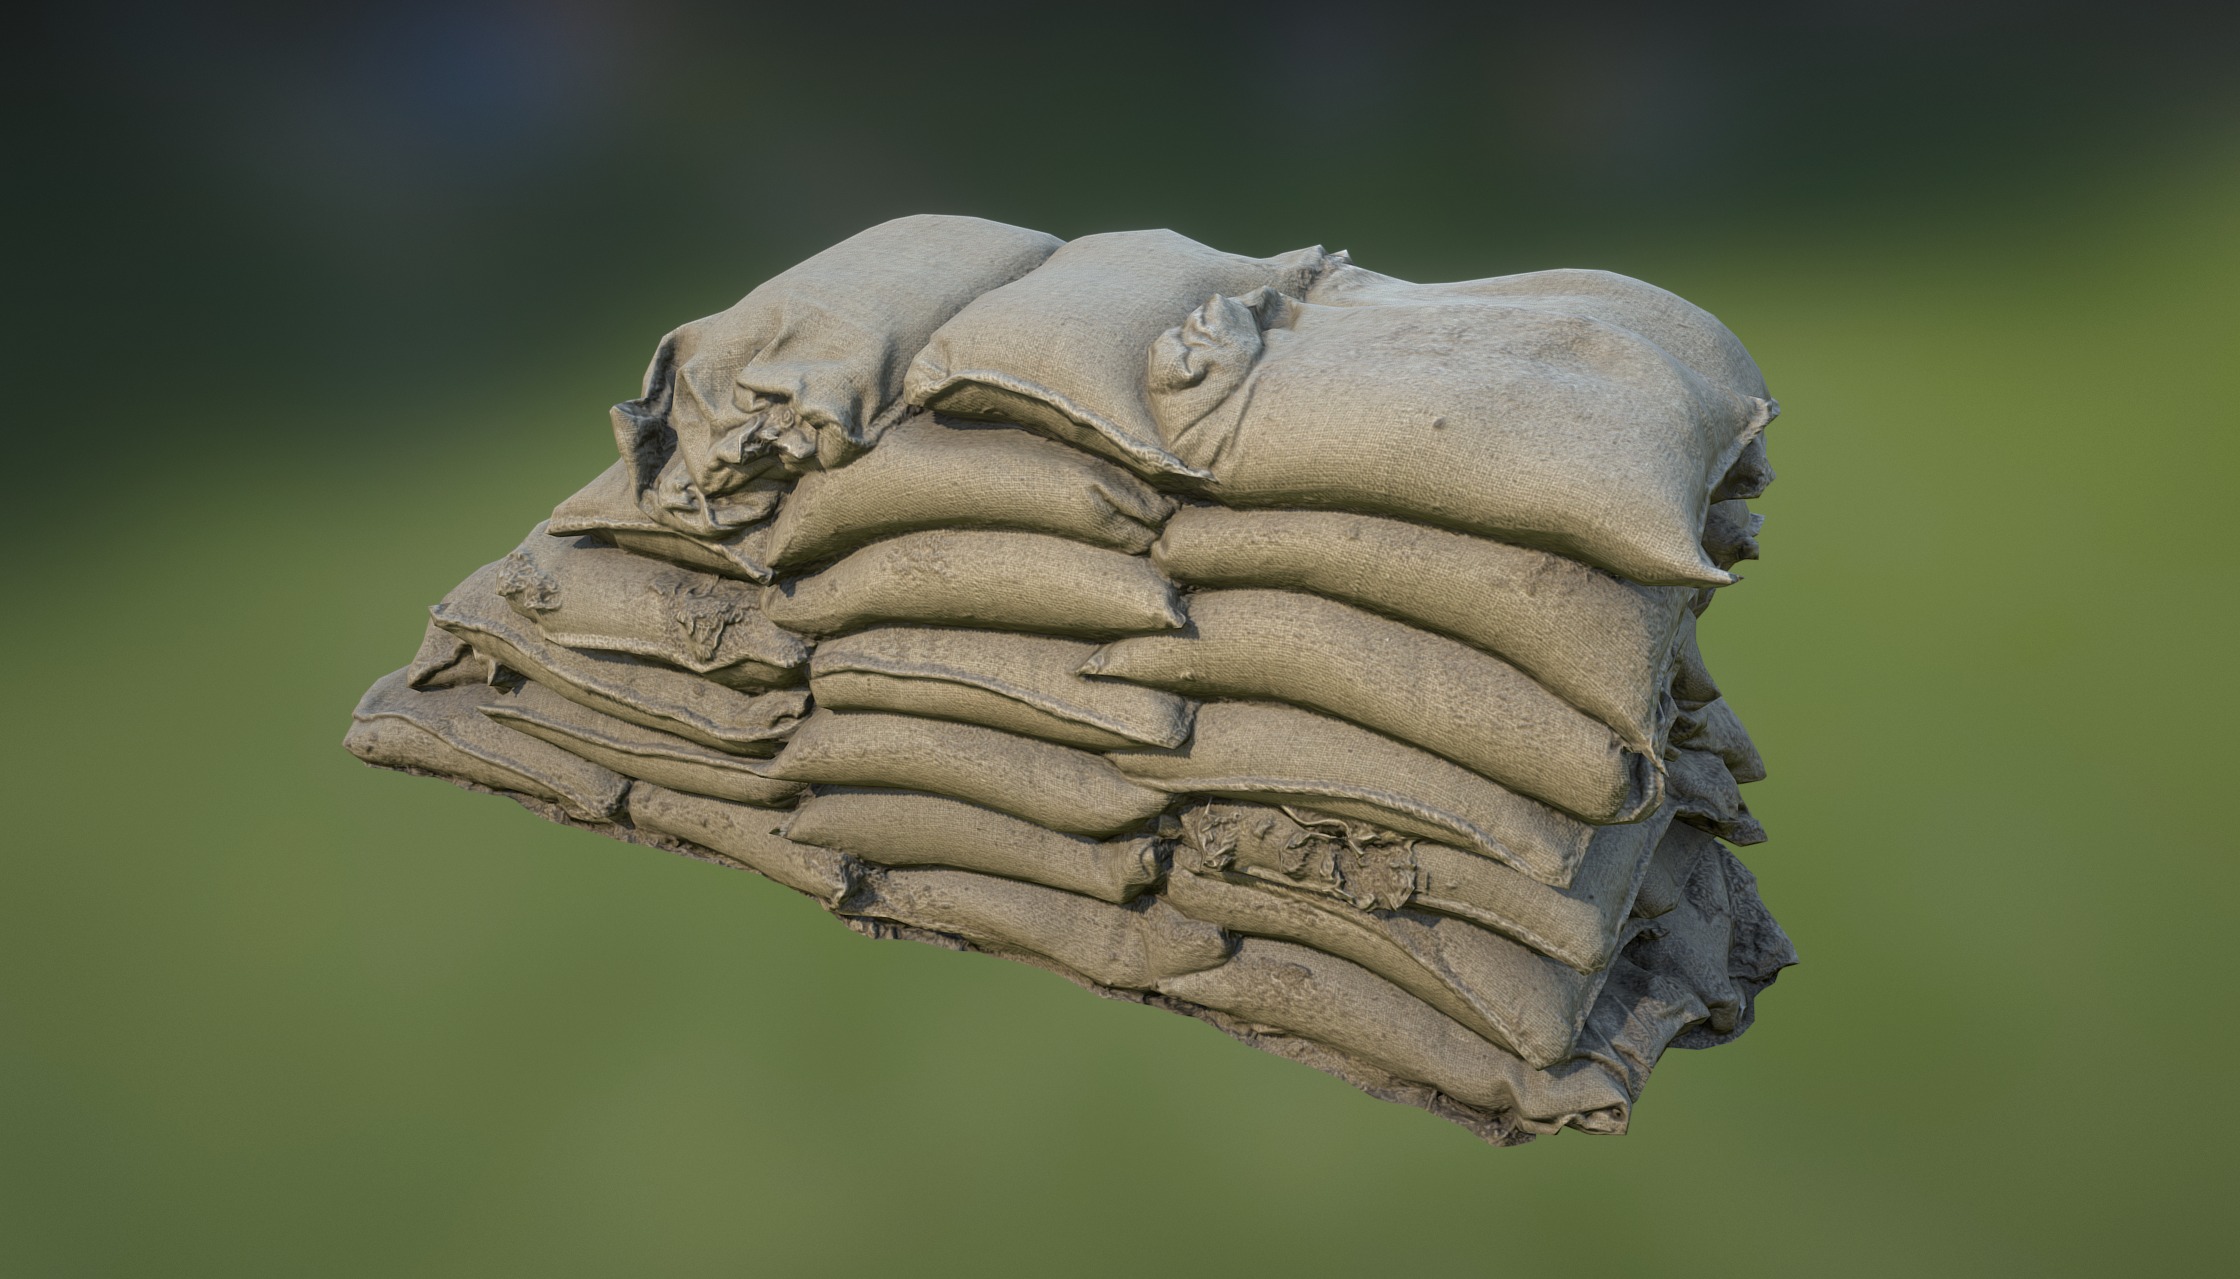 A sandbag wall part of the sandbag wall pack for Unreal Engine 4. Very large textures 4096x4096, wait for textures to load for full detail (Might take up to 30 seconds or more depending on your connection).  Note: Does not display the additional high-res detail textures and advanced shader set-up available in UE4.  For the complete package check out:  -link removed-  http://www.mountaintrail.co/ - Sandbag Wall End 01 - 3D model by Mike Trail (@mountaintrail) 3d model